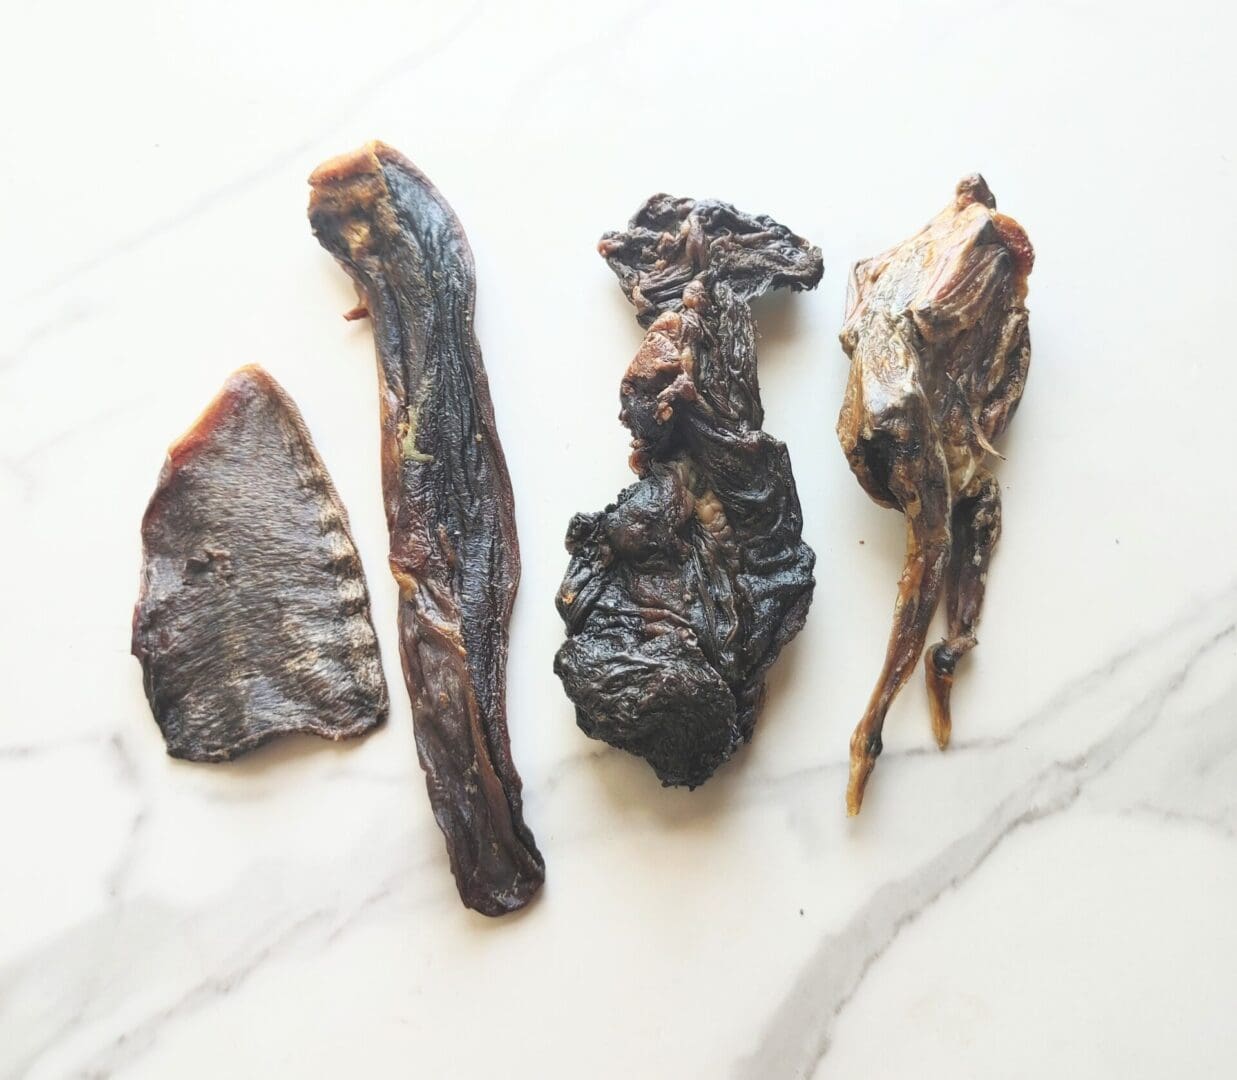 Four dried meat treats on white marble.